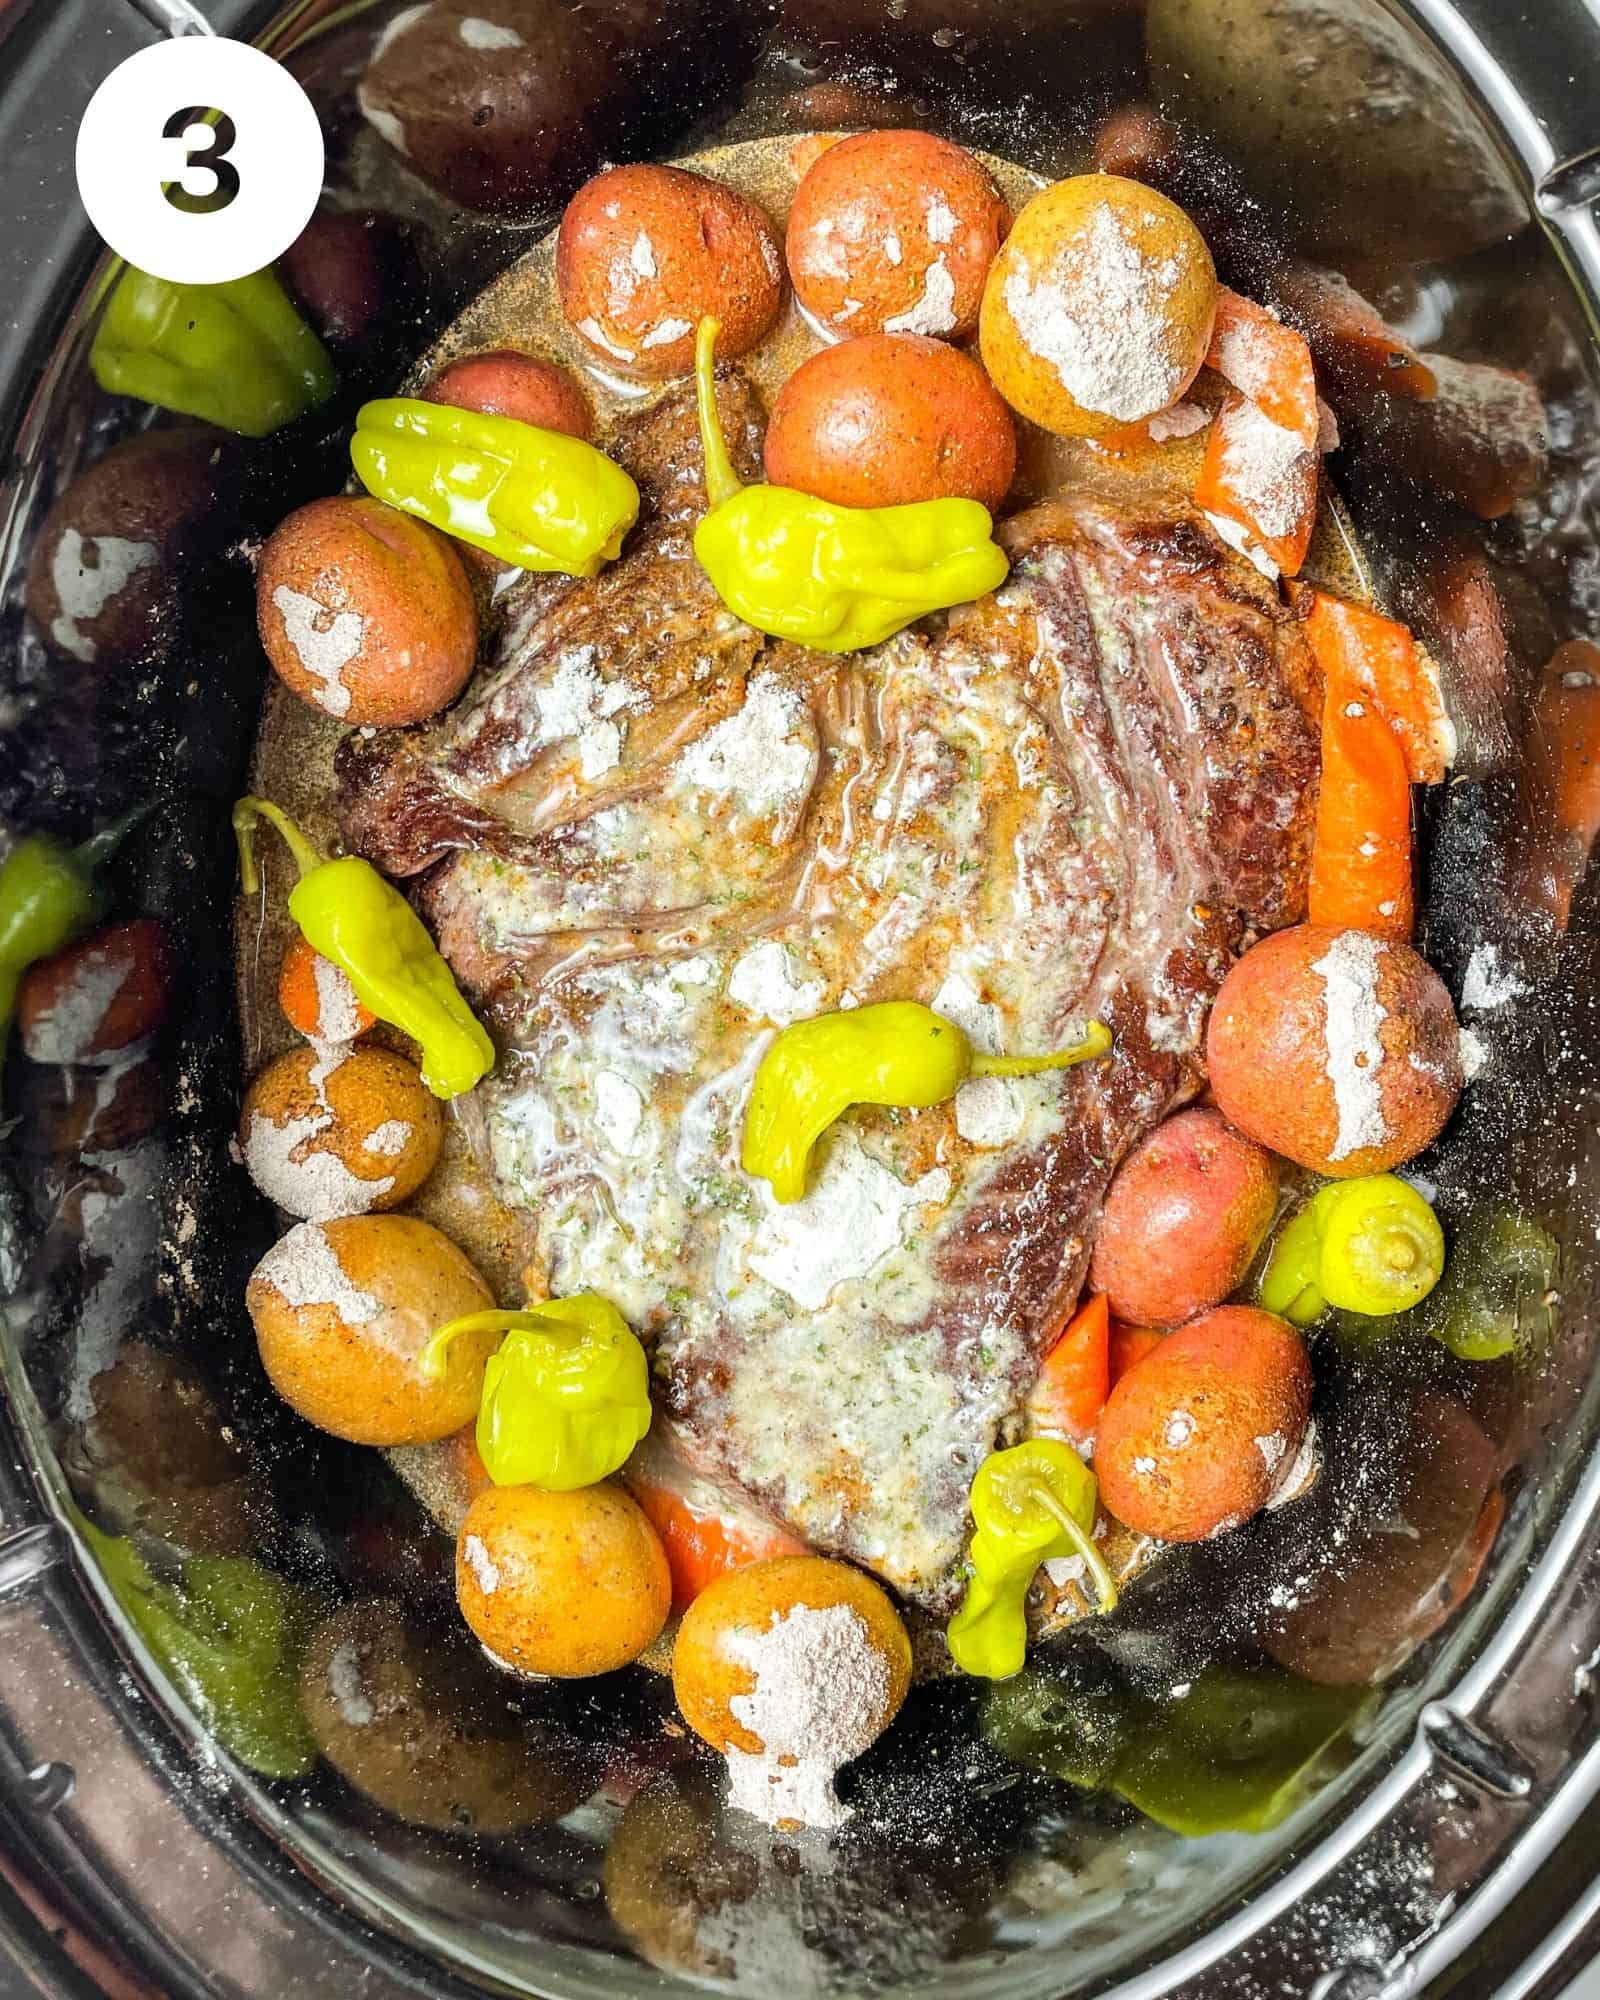 mississippi pot roast in a slow cooker with potatoes, carrots, pepperoncini peppers, beef broth, seasoning packets, and butter.